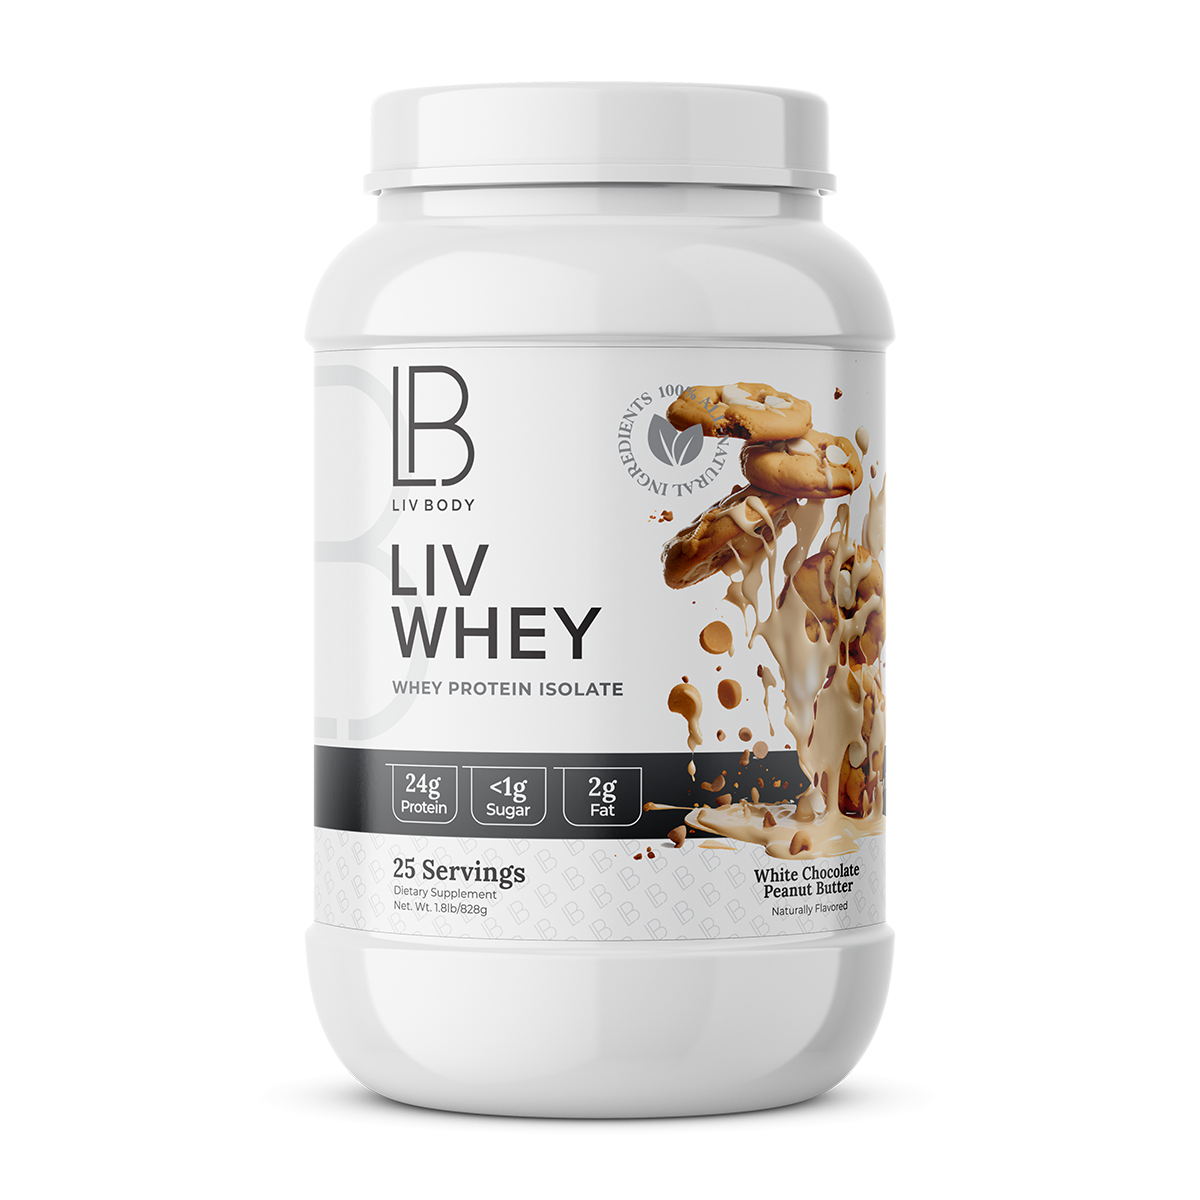 LIV Whey - Isolate Protein